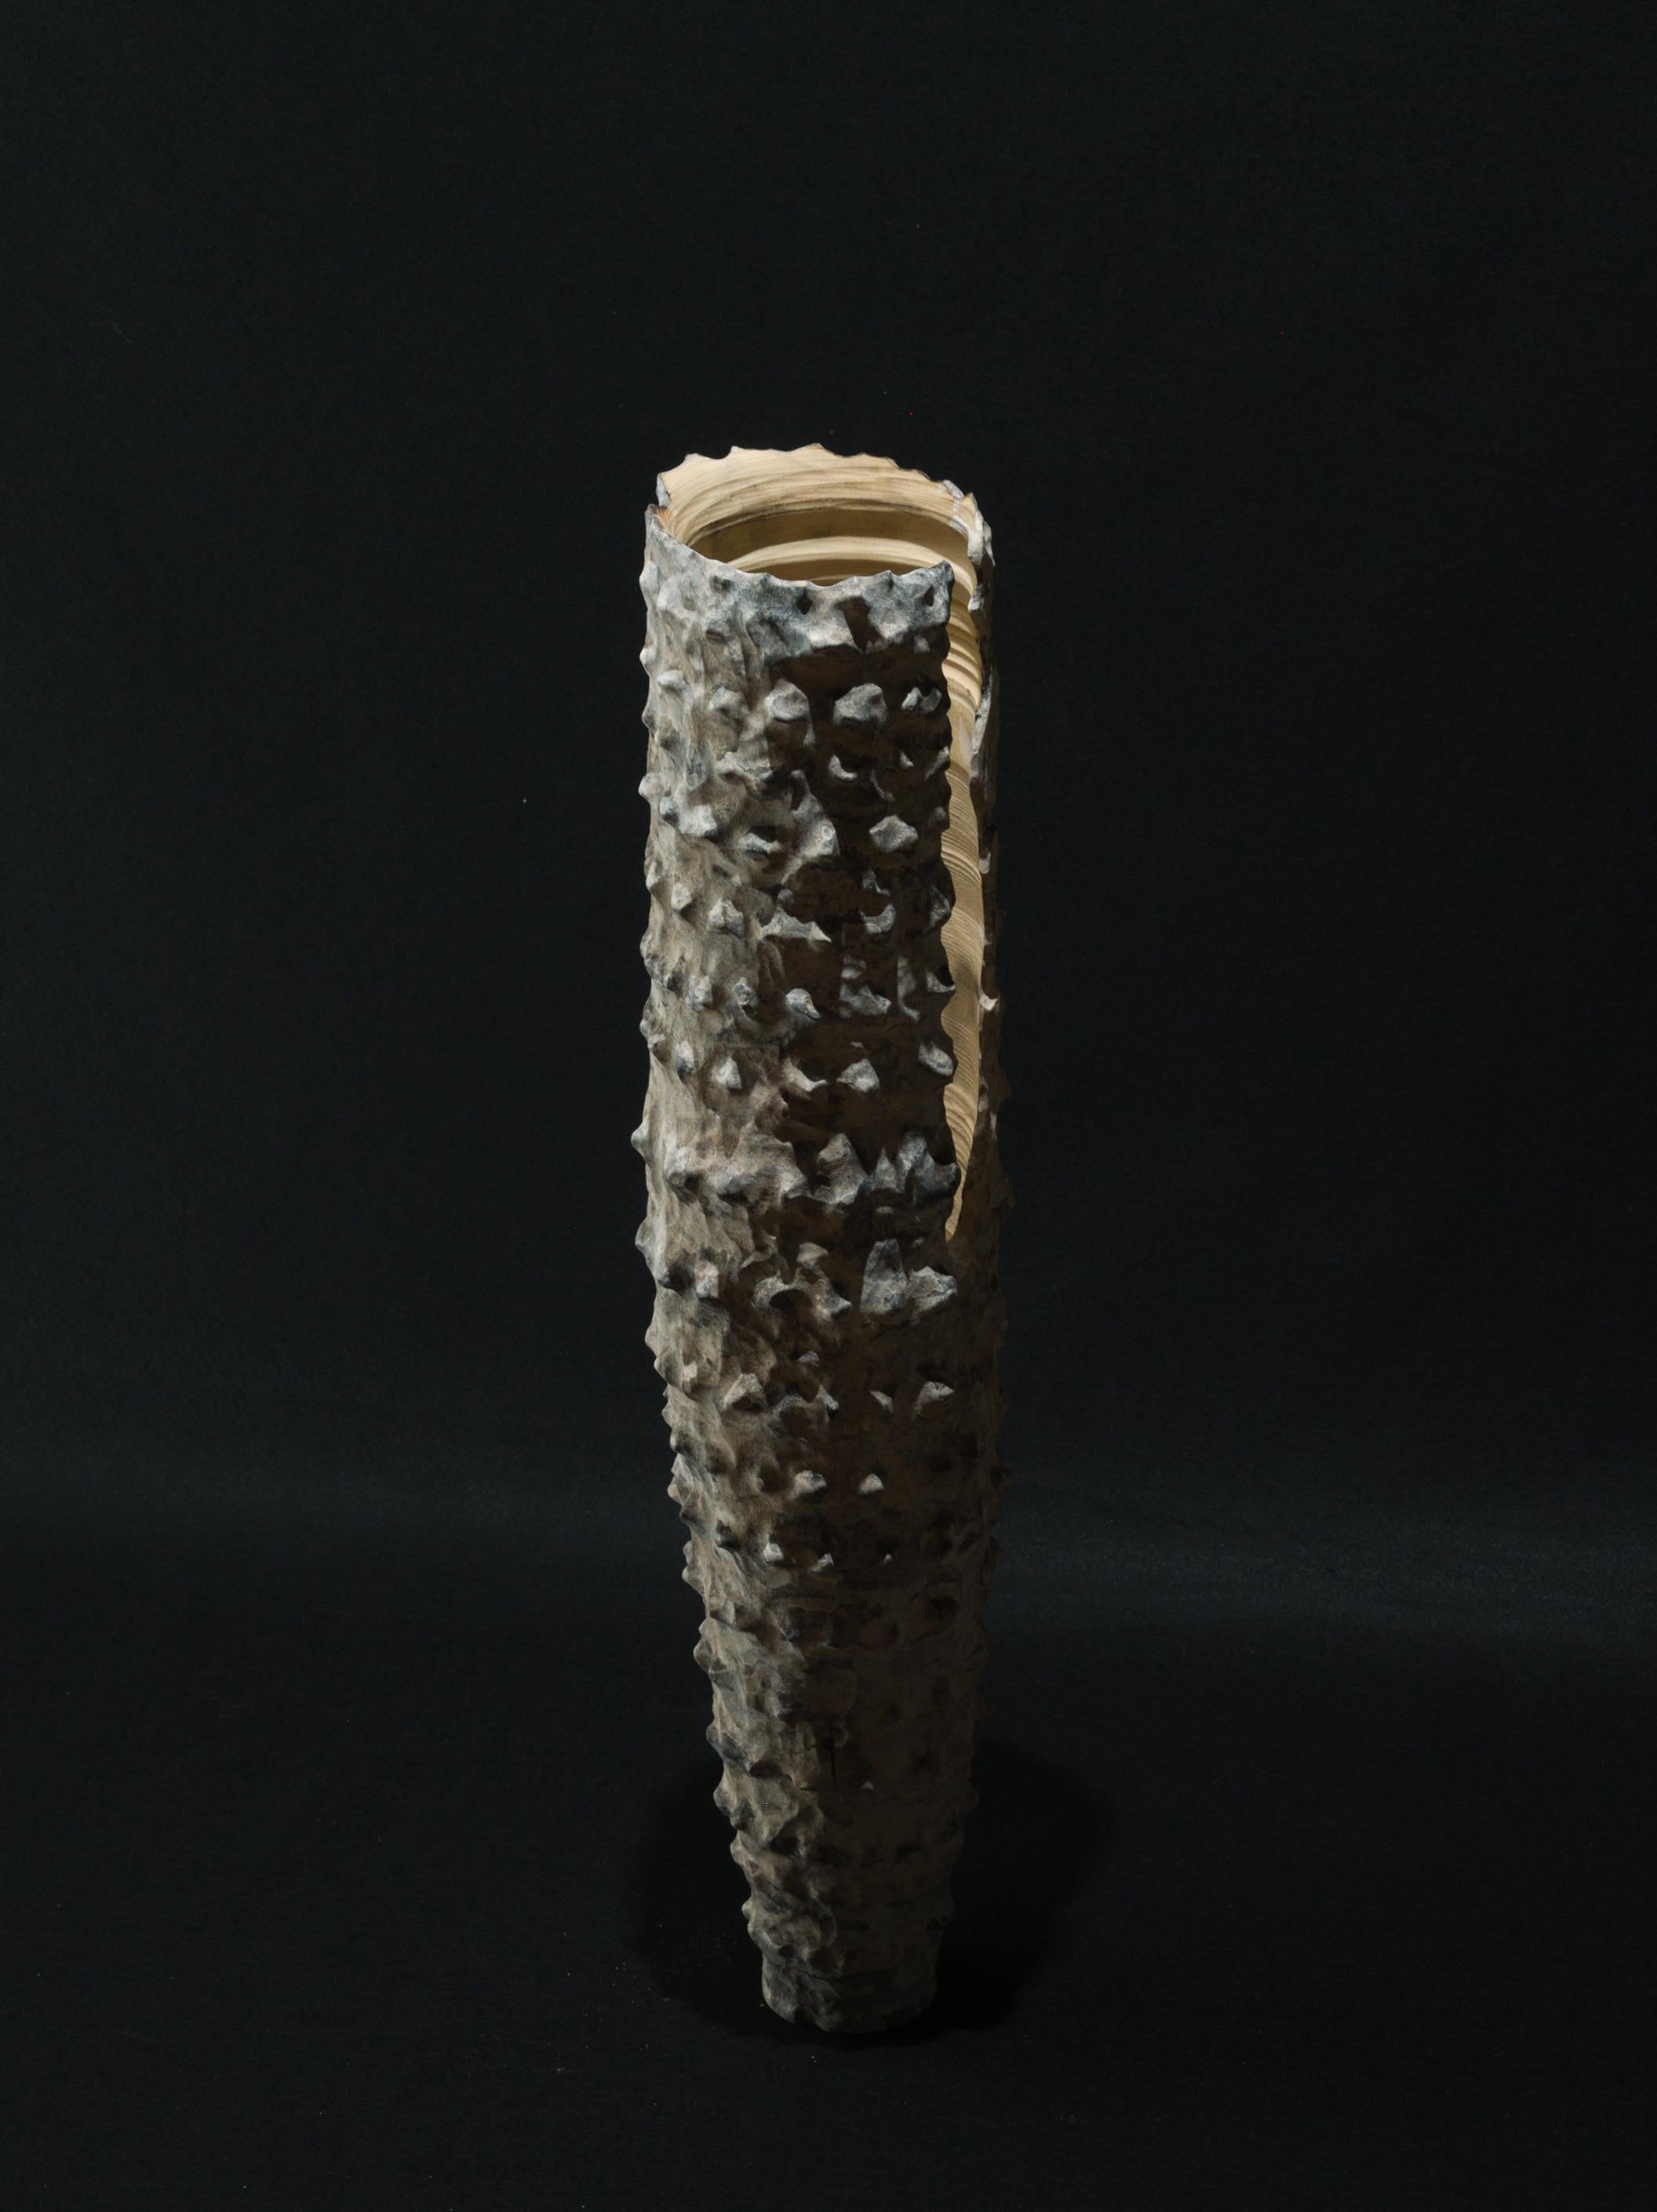 Inspired to the helical patterns found in marine shells, this vessel is roughed on a lathe from a massive piece of maple, then extensively carved to leave a spiral pattern of thorn like protuberances on its surface. Treated with oxides and natural